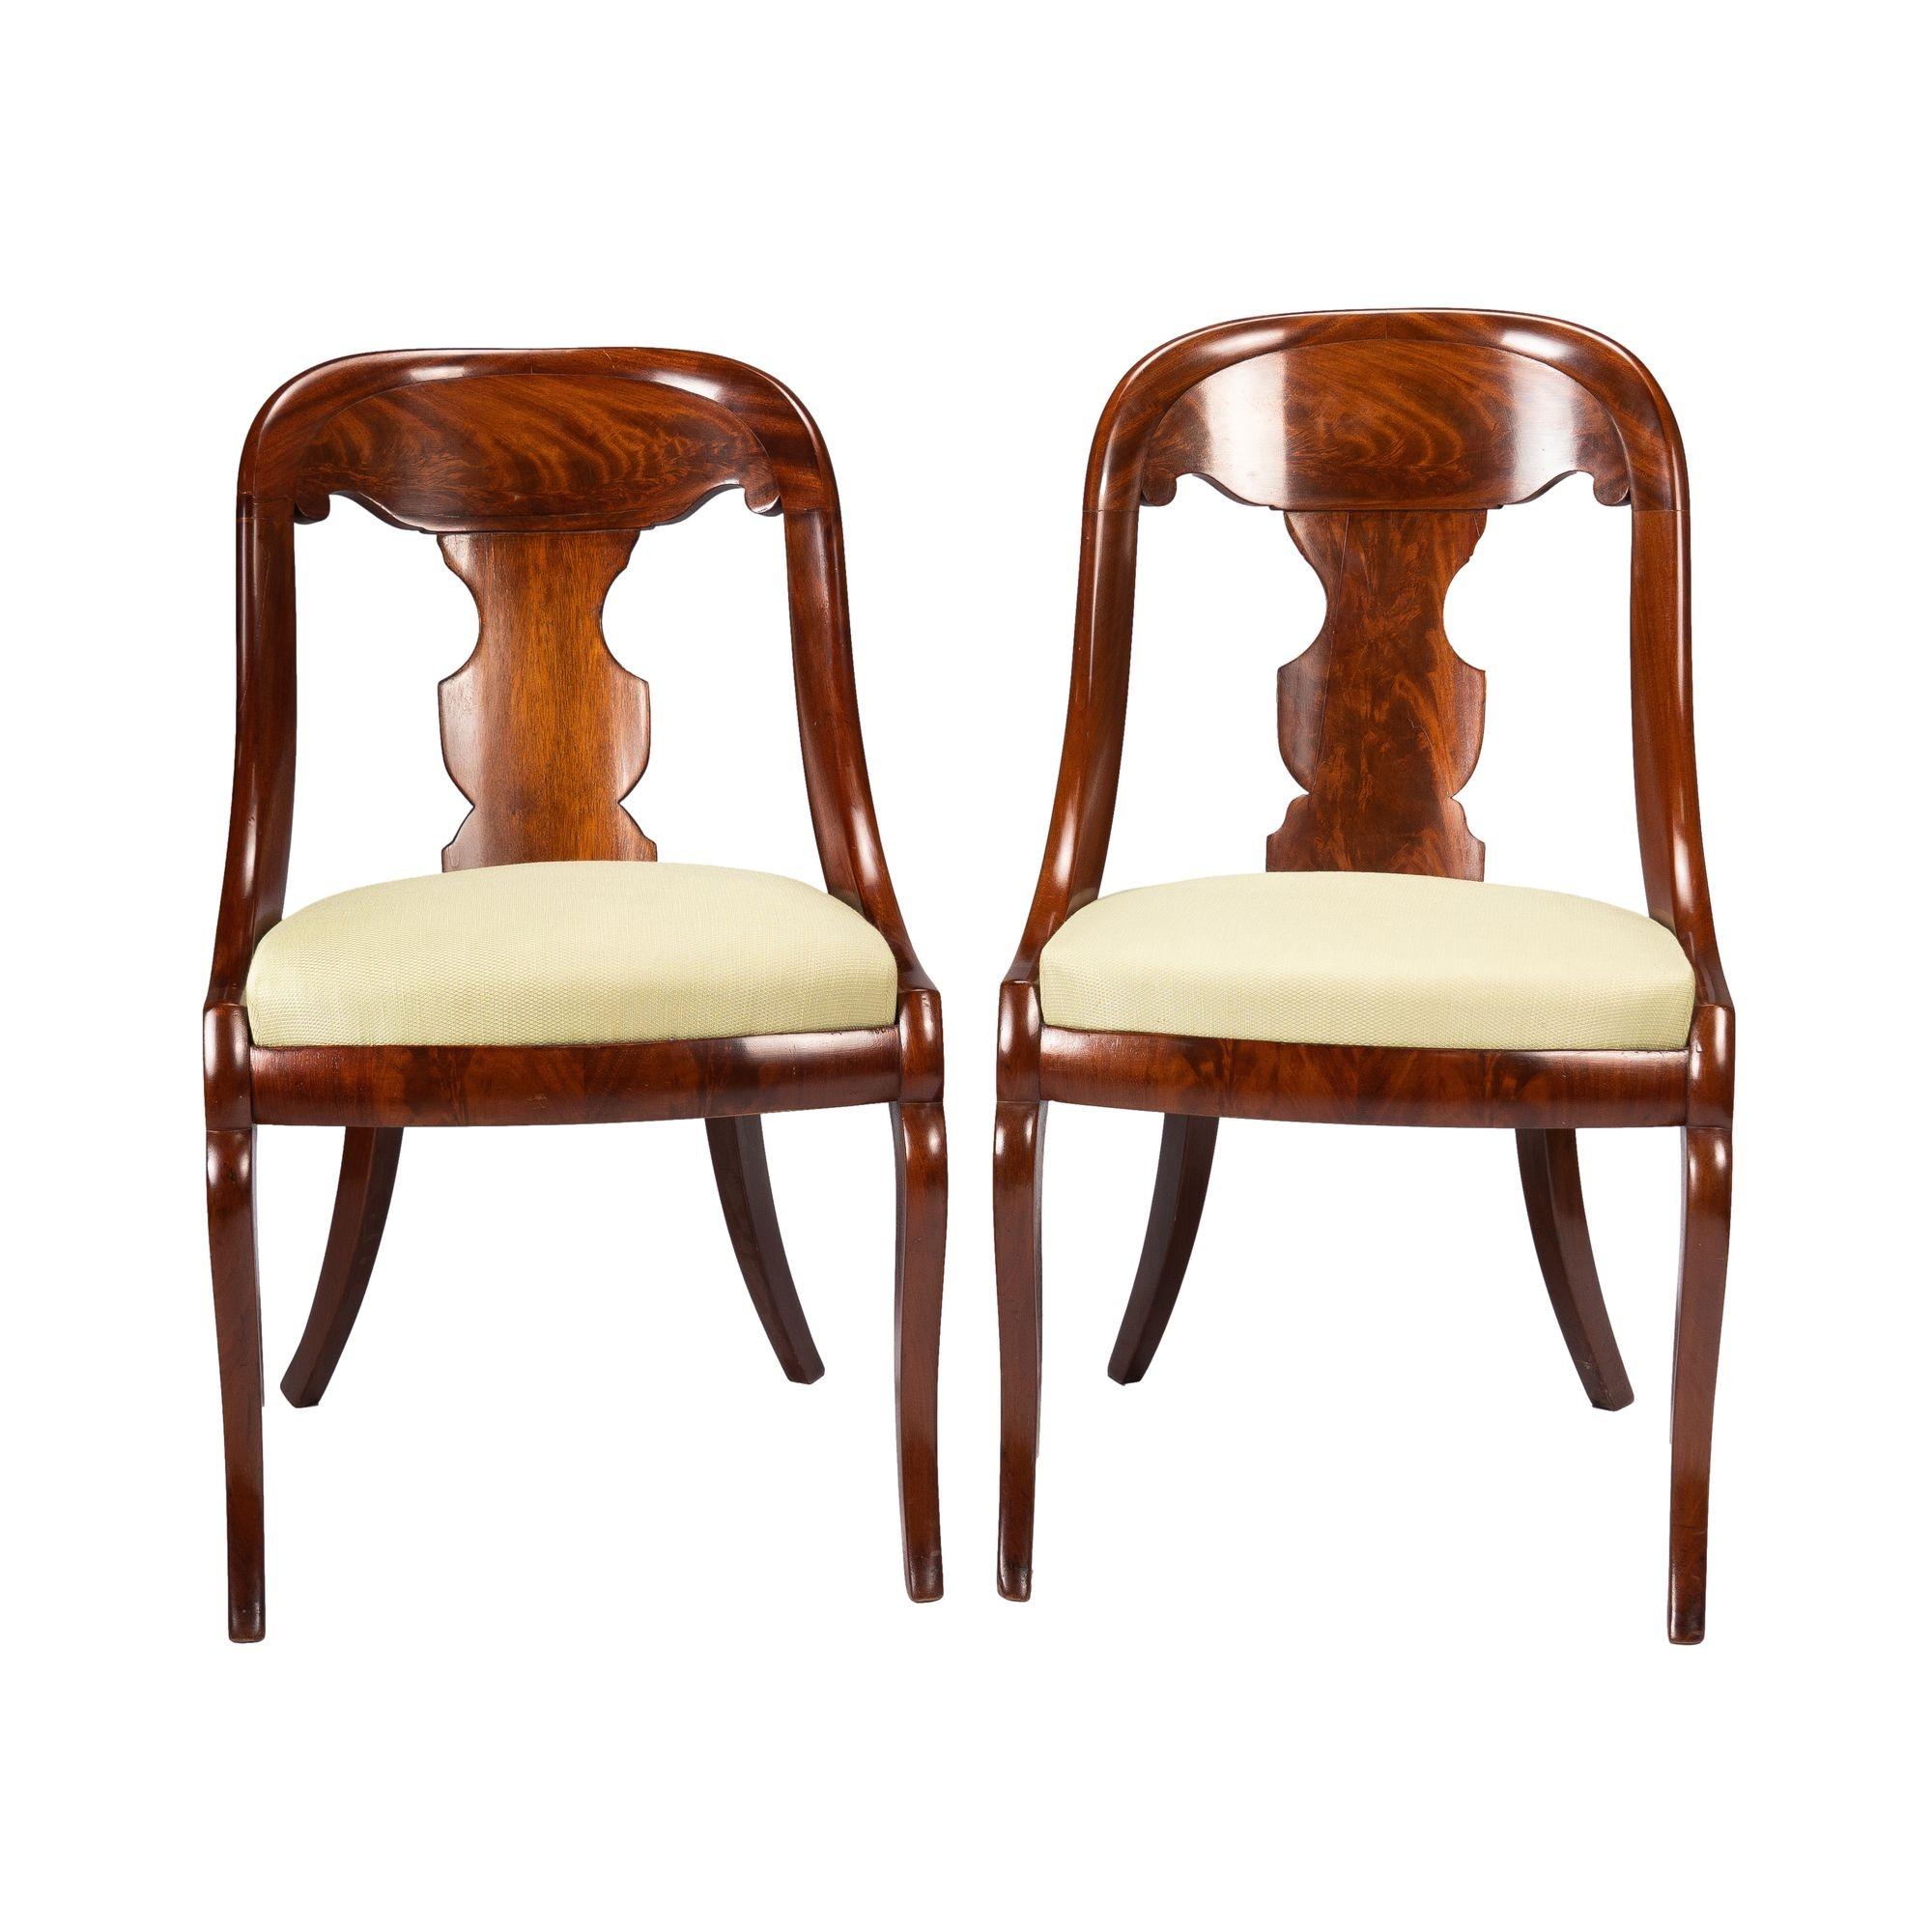 19th Century Pair of American Mahogany Gondola Chairs, 1815-35 For Sale